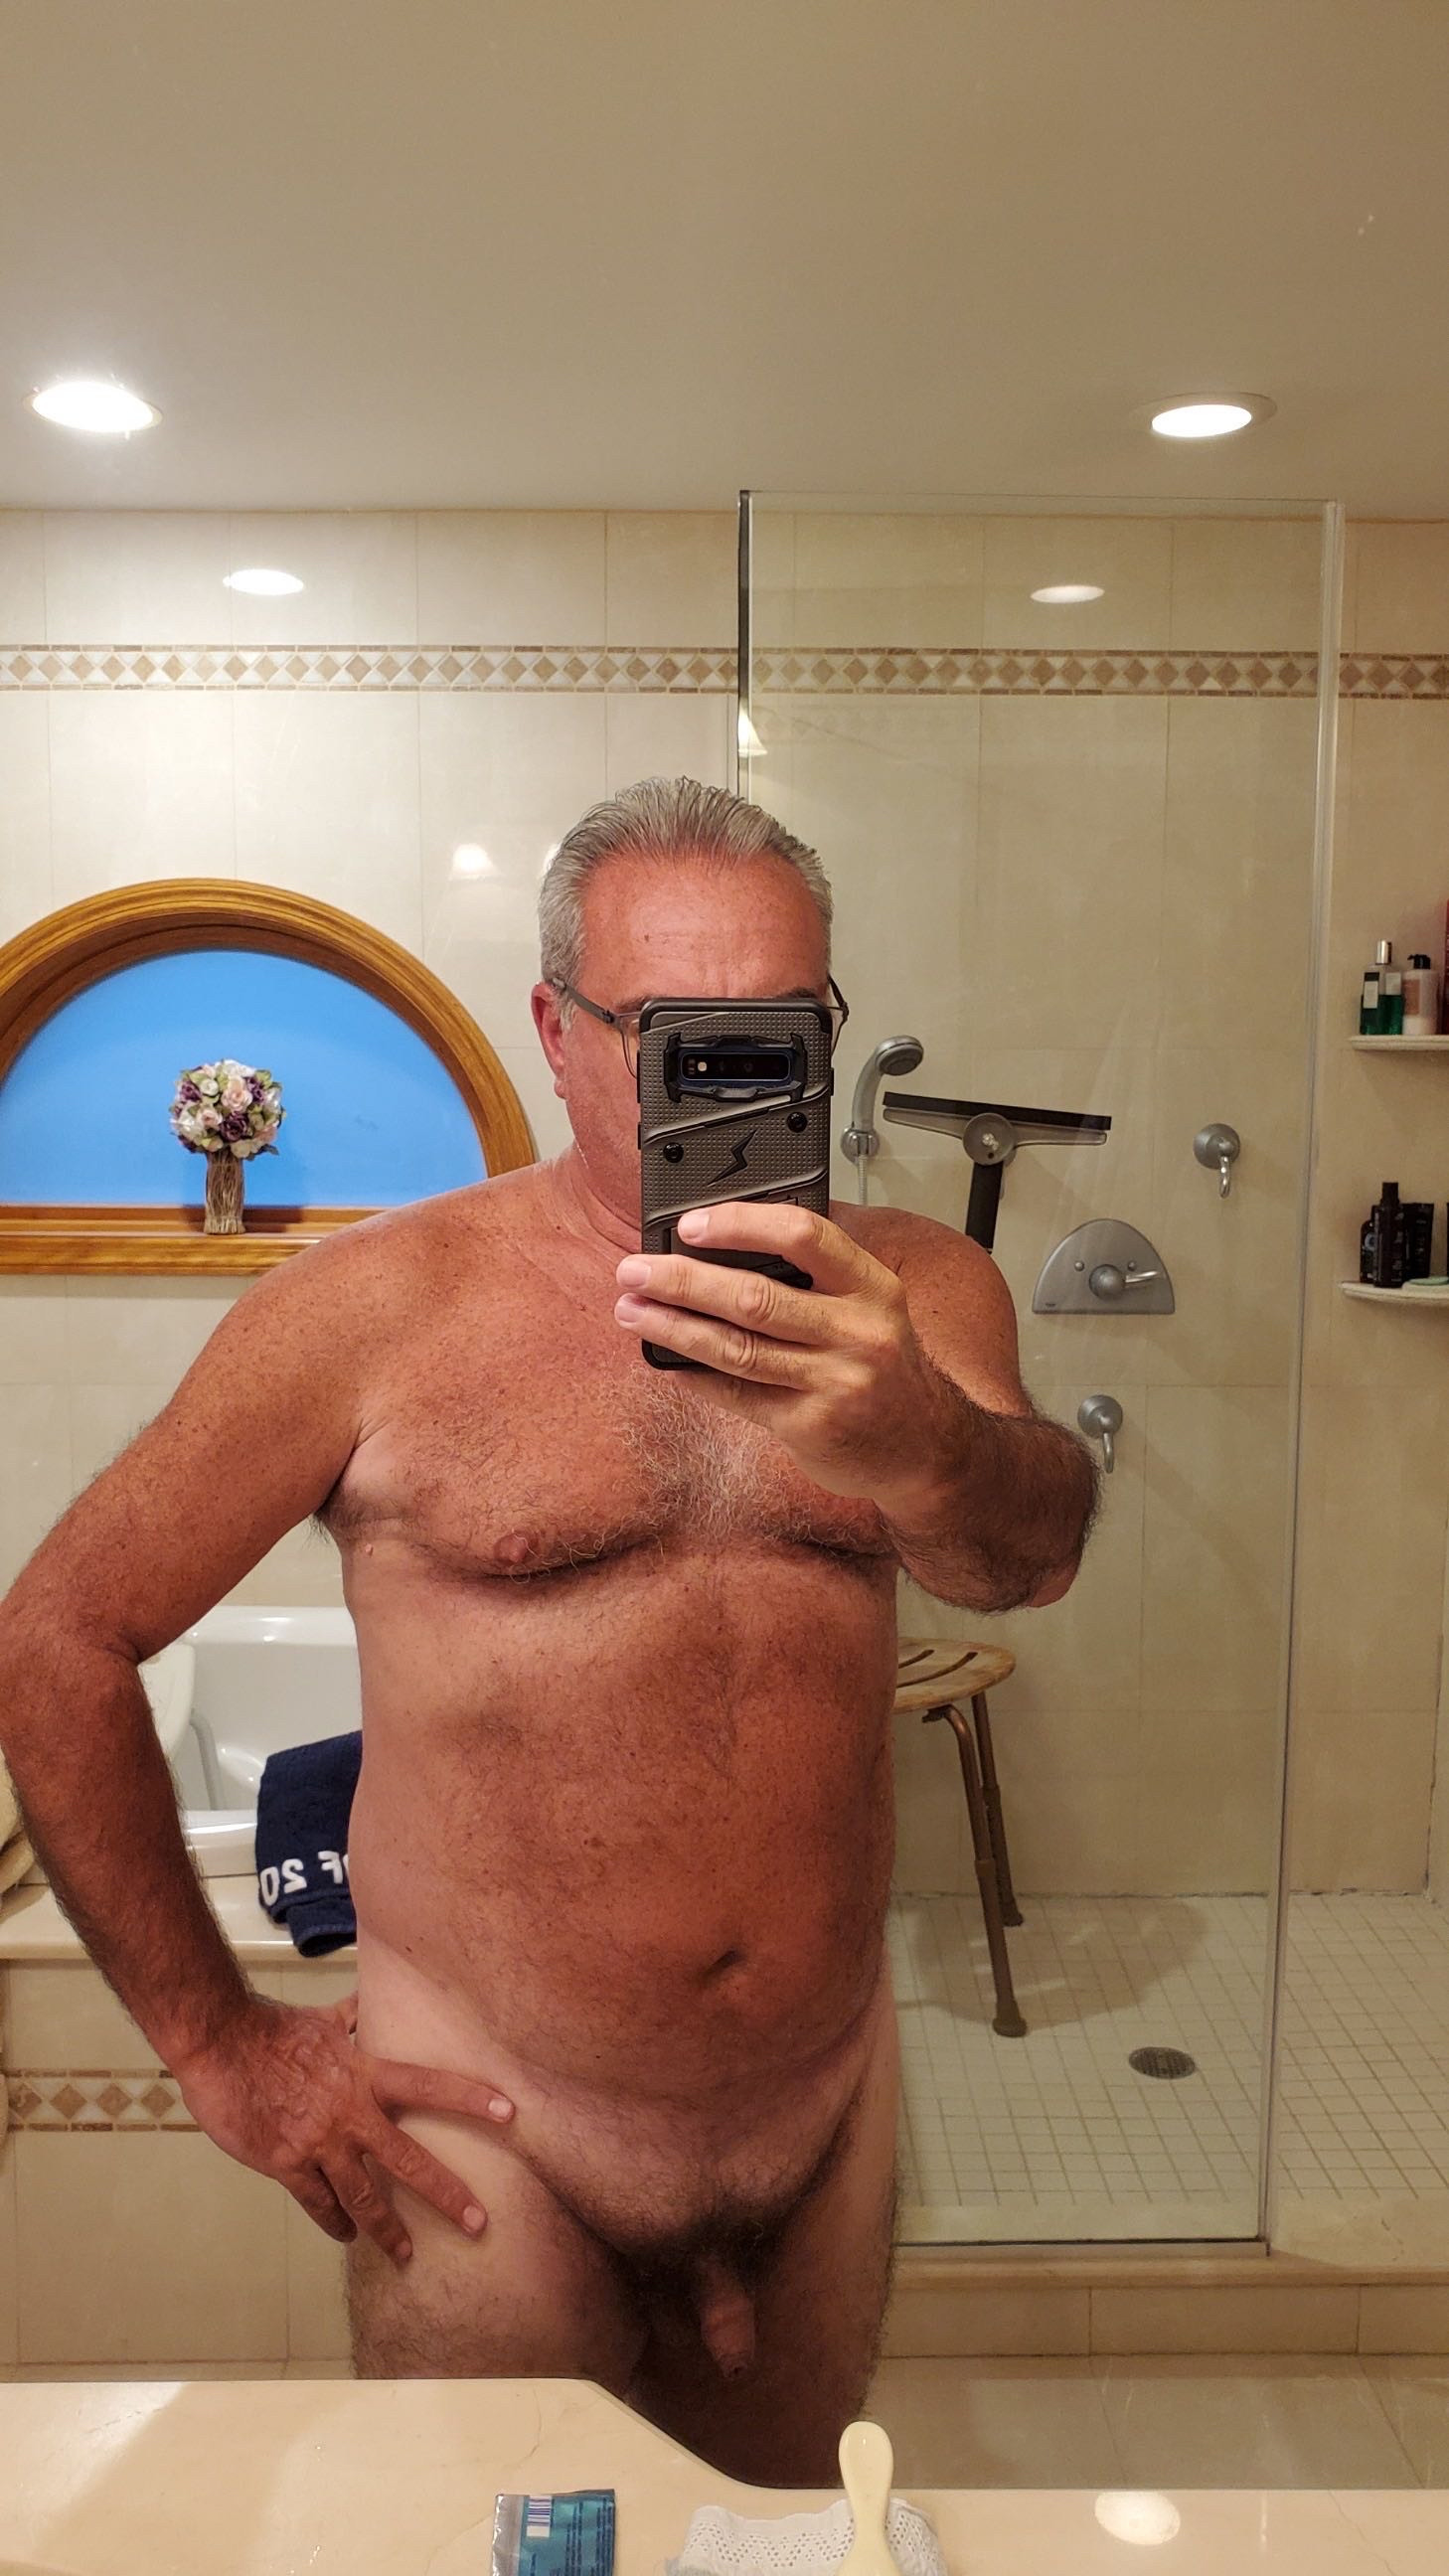 Hello famz this is Salvatore DiMartino’s naked pictures we met on Facebook and then to Instagram his username is sdimart he tried to hurt me so I’m spreading his nudes rn to make him feel ashamed all I want is you guys so share this pictures all over the world and your Instagram and Facebook page till it go viral and get to all his friends and family that’s all This’s number below +1 (917) 346-9134

Home address Address: 15478 Riverside Dr, Whitestone, NY 11357-1340

Office: 615 Merrick Avenue
Westbury NY 11590